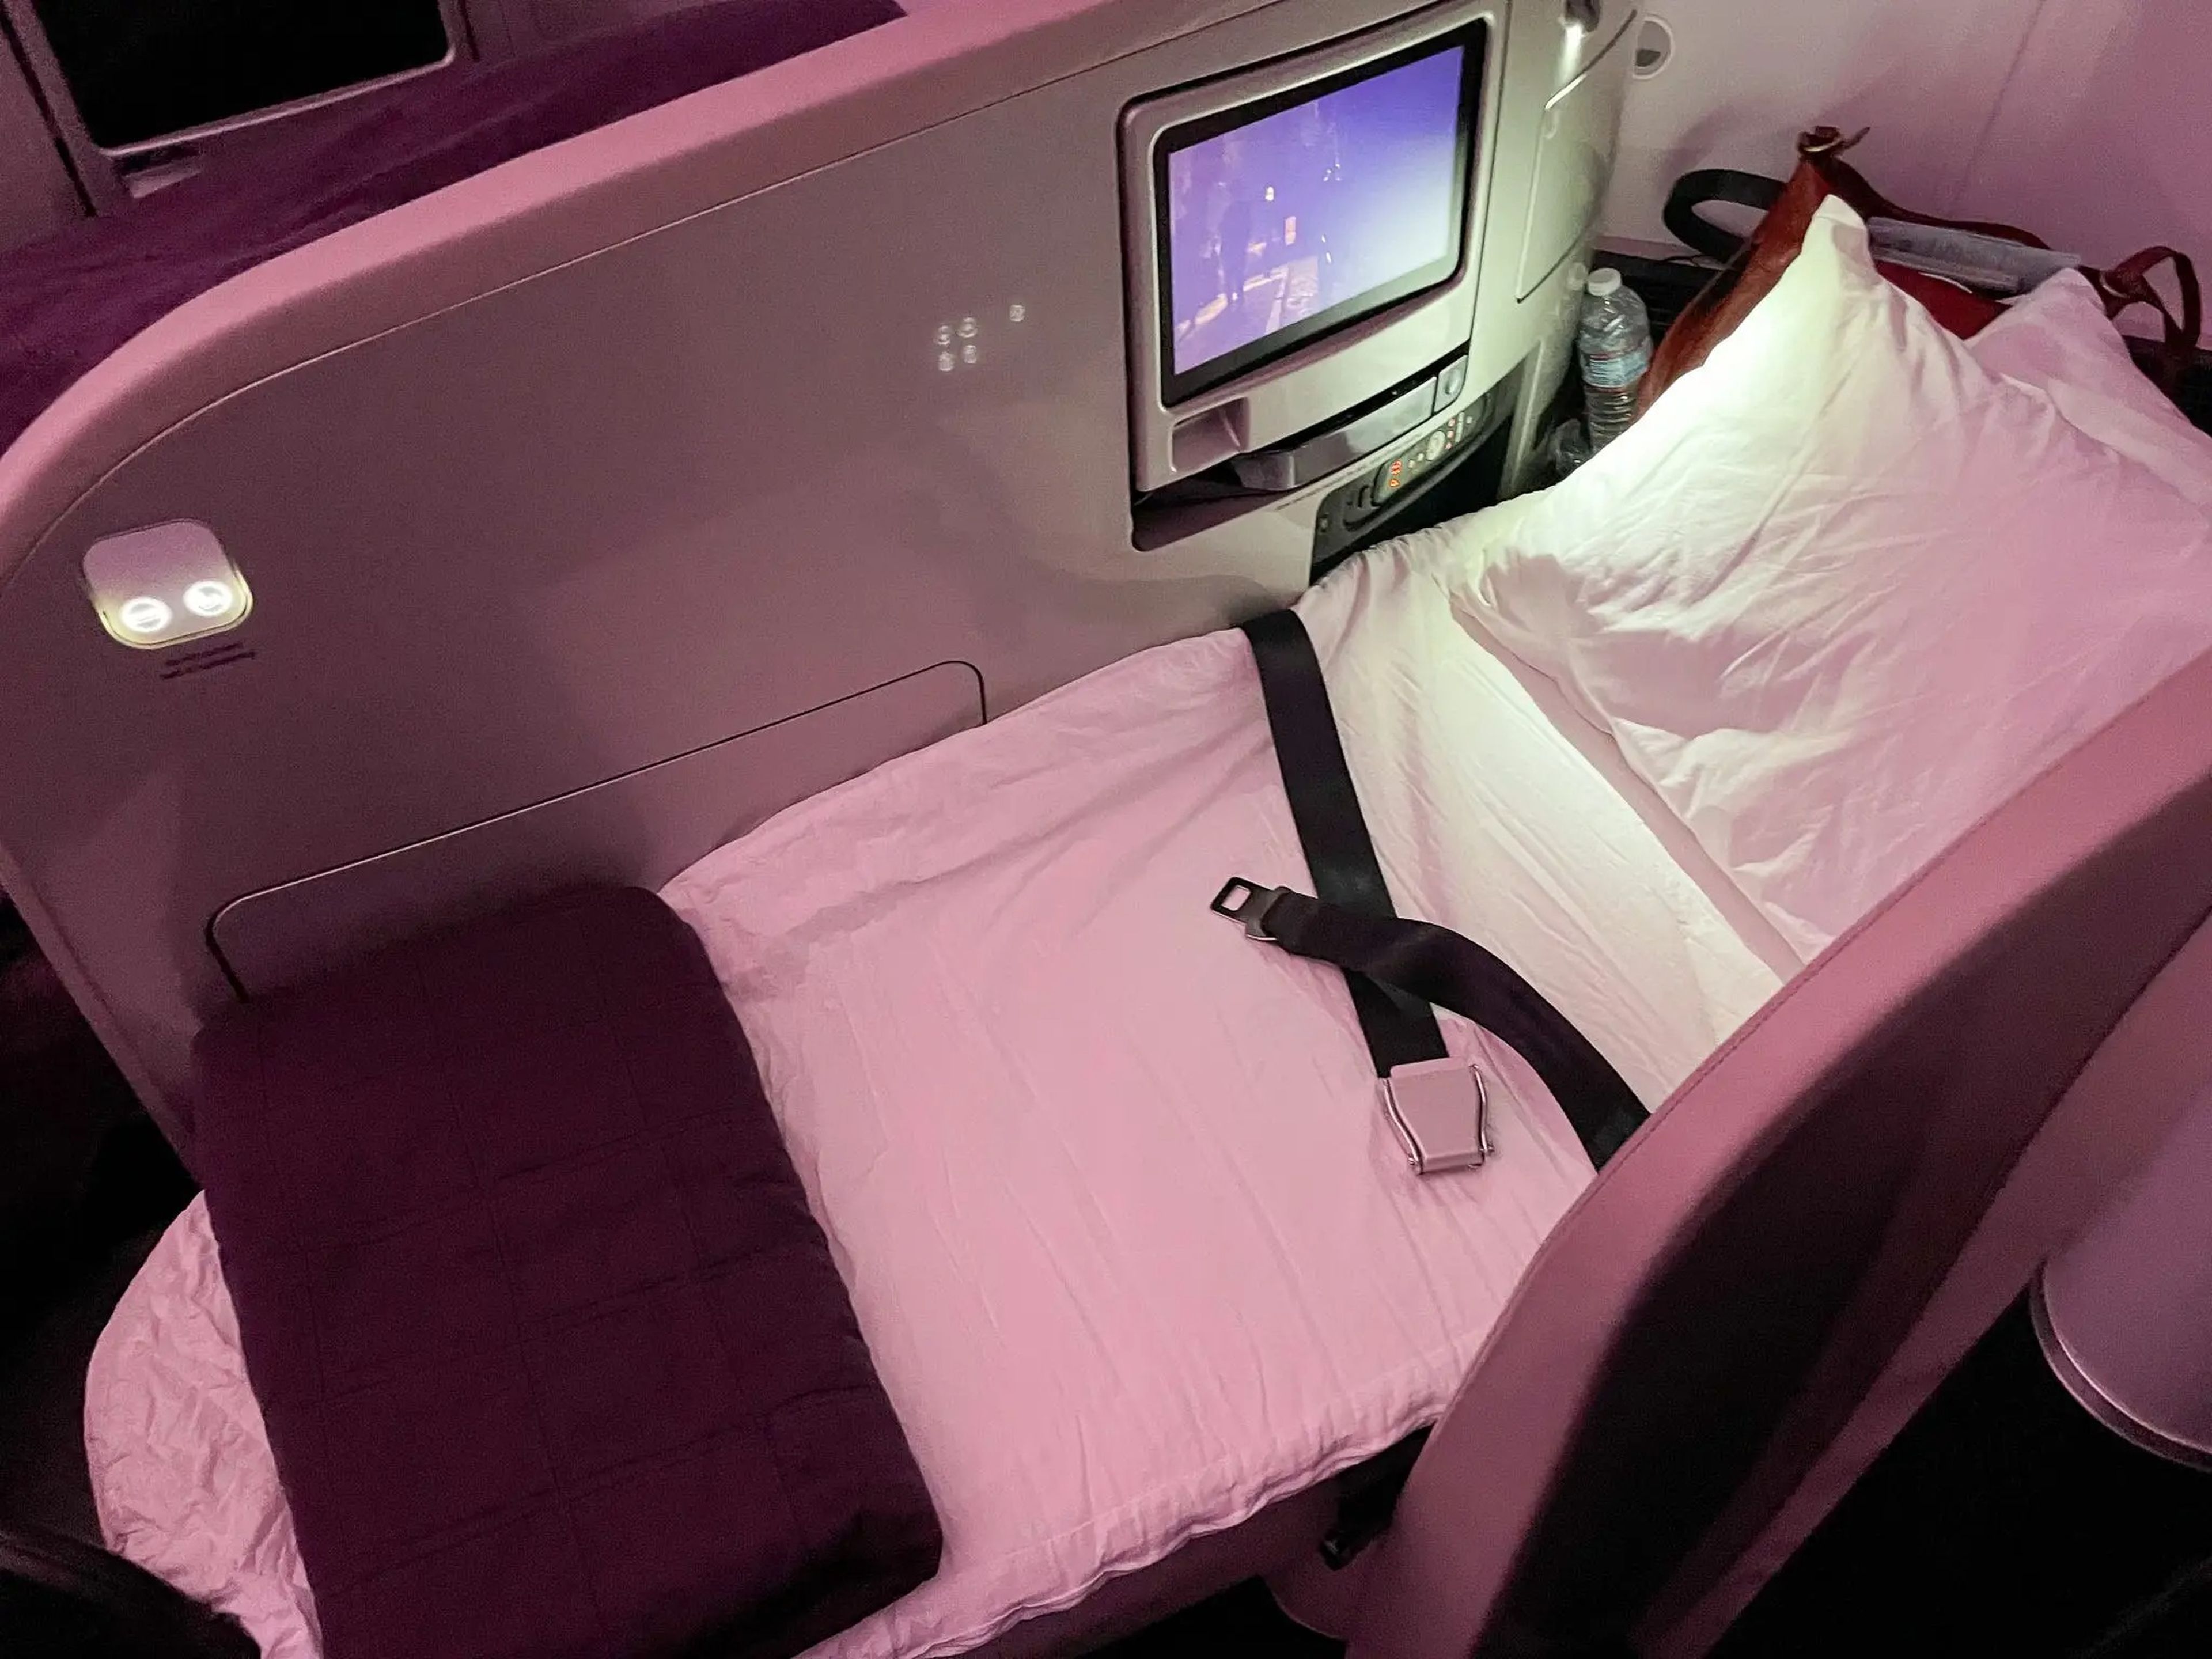 After dinner, flight attendants stopped at each seat to convert it into a bed.